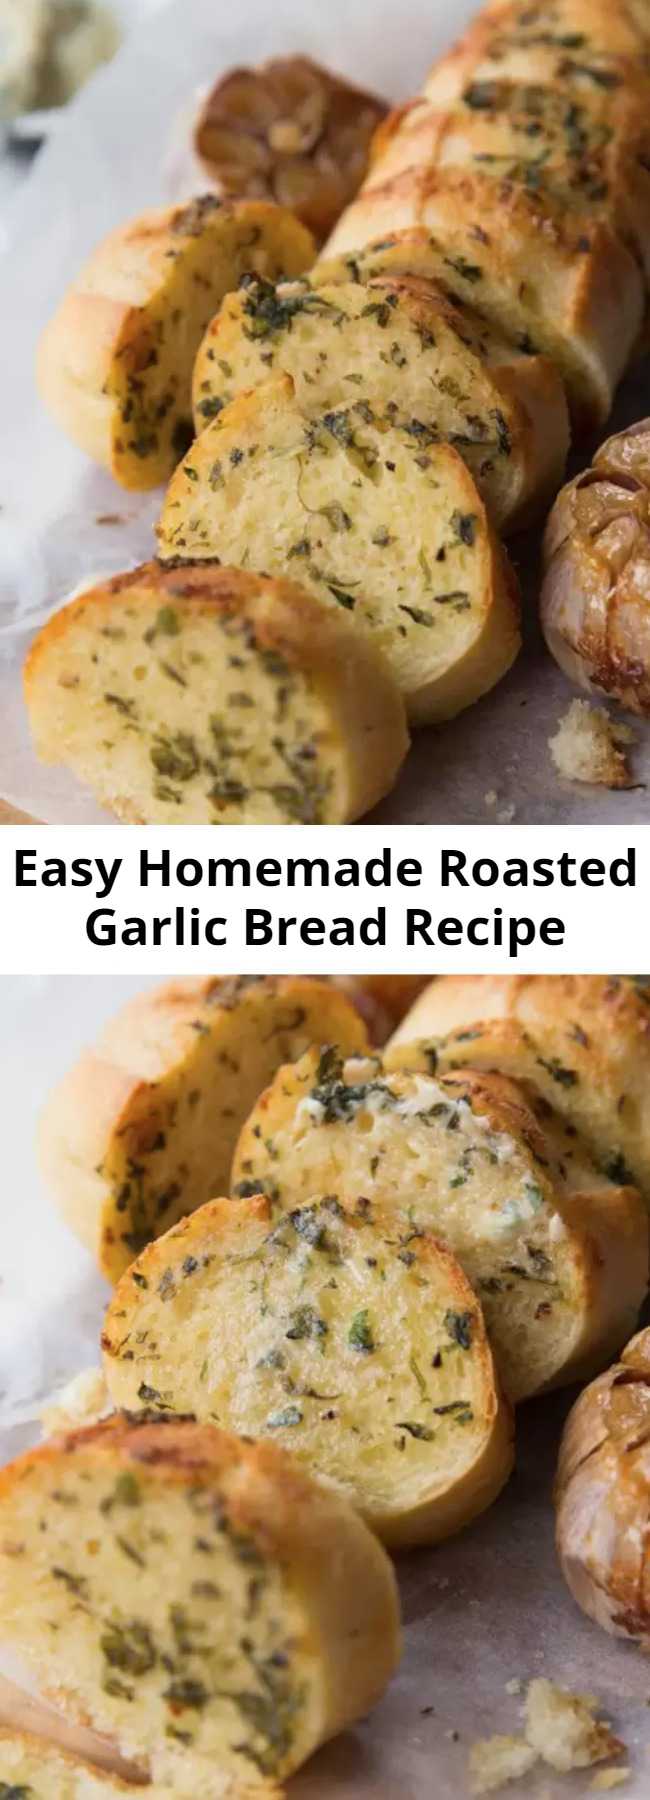 Easy Homemade Roasted Garlic Bread Recipe - Take your homemade garlic bread to the next level by using roasted garlic! Using minimal ingredients this truly is the ultimate side dish to any meal! #bread #garlicbread #sidedish #appetizer